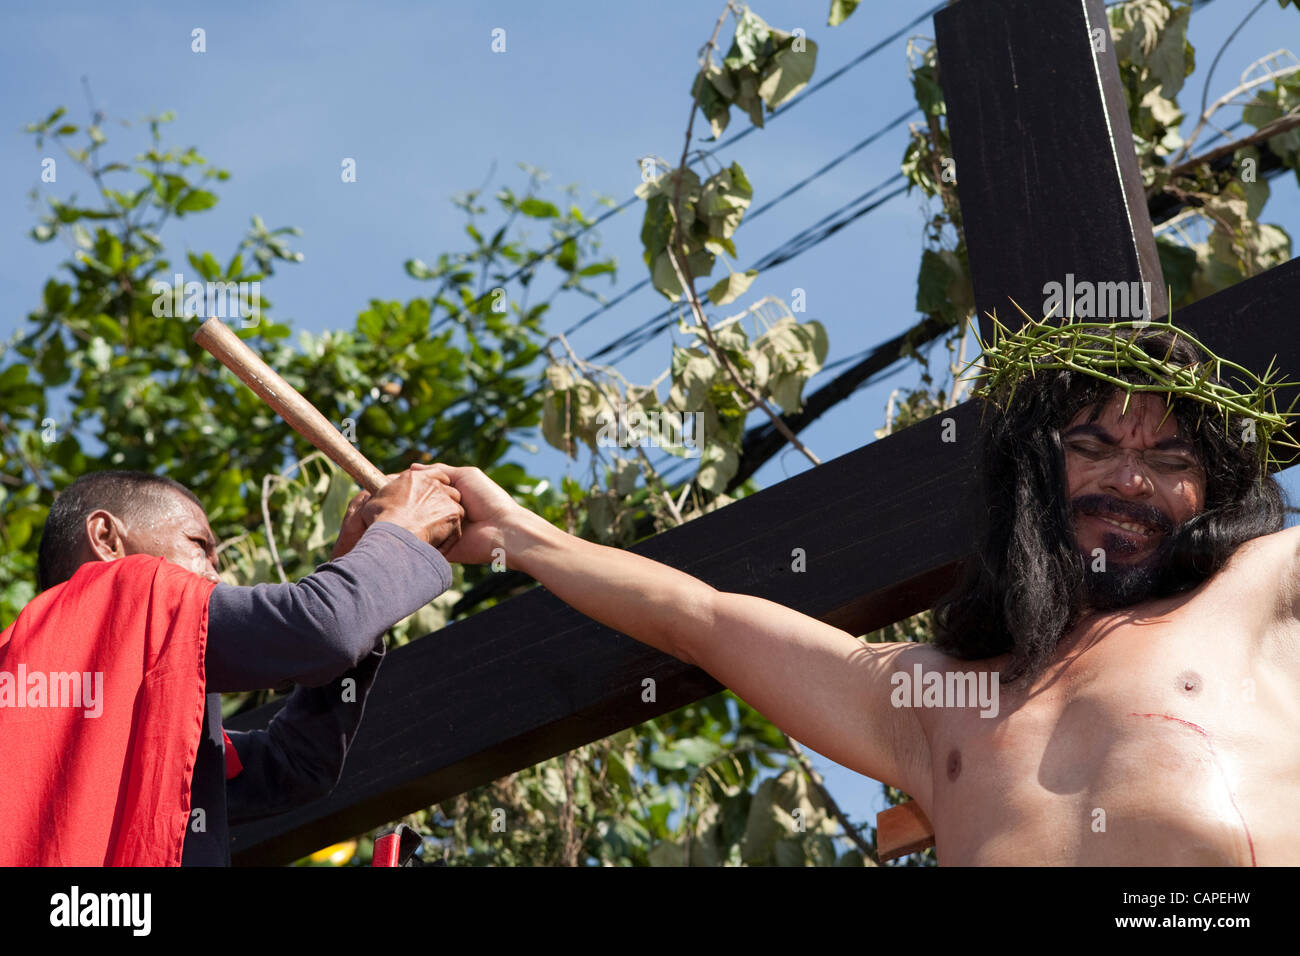 Cebu City, Philippines, Good-Friday, 6.April 2012: Gilbert Bargayo, being nailed to the cross for the 17th Good Friday.  The removal of the nails is extremely painful. Stock Photo